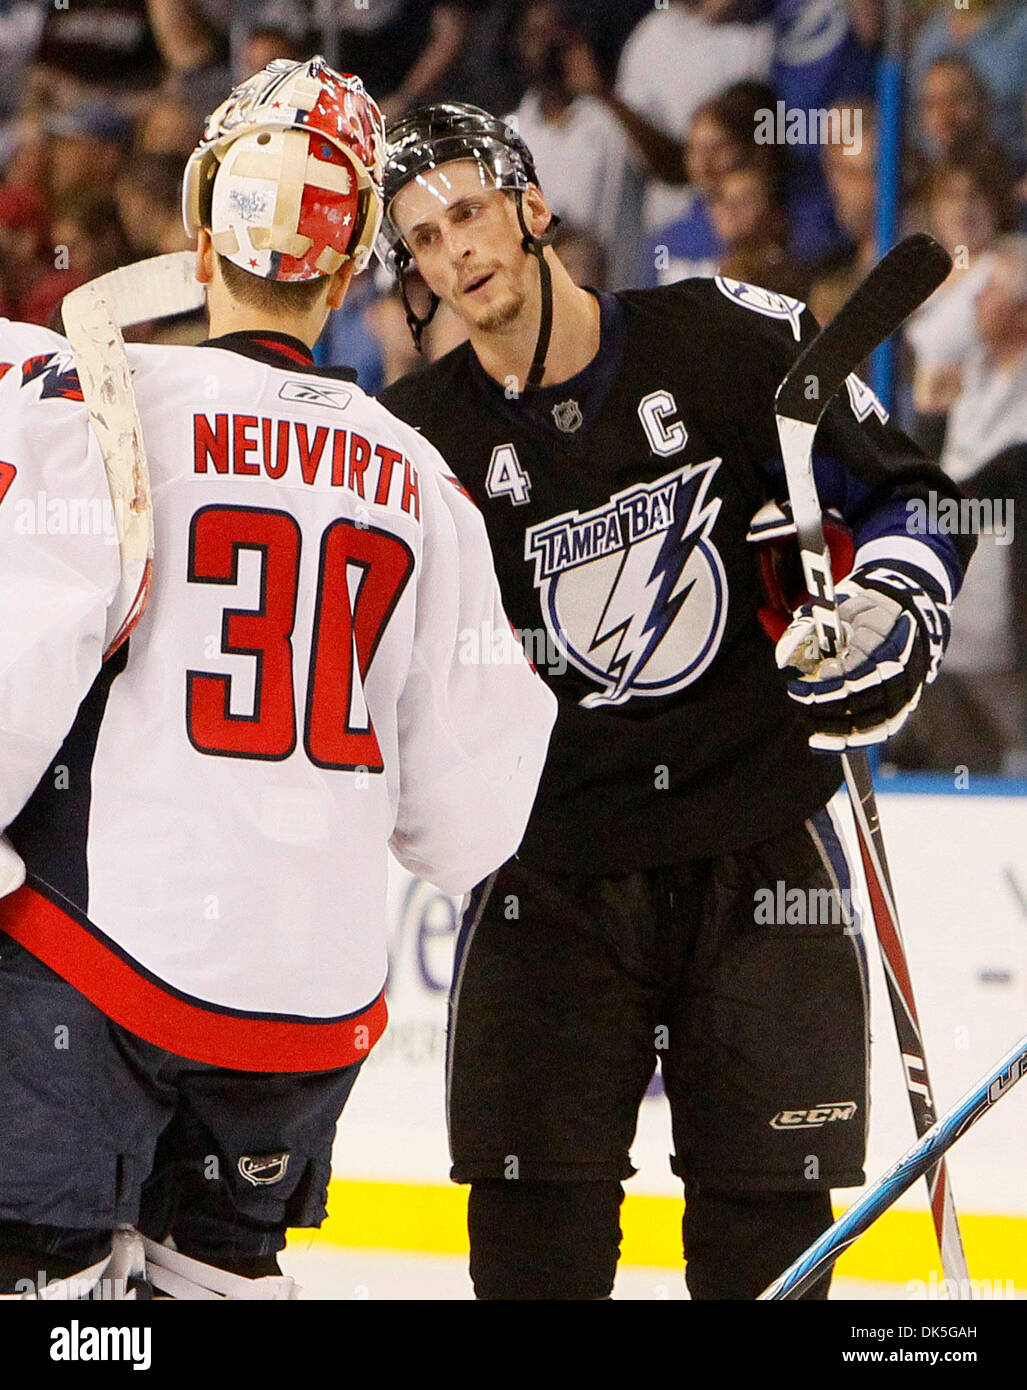 May 4, 2011 - Tampa, FL - DIRK SHADD   |  Times .SP 337940 SHAD LIGHTNING 29 (05/04/11 TAMPA, FL) Tampa Bay Lightning Vinny Lecavalier (4) shakes hands with Washington Capitals goalie Michael Neuvirth (30) at the end of a Lightning 5 to 3 victory in game 4 of the Eastern Conference Semifinals at the St. Pete Times Forum in Tampa Wednesday evening (5/04/11).[DIRK SHADD, Times] (Cred Stock Photo